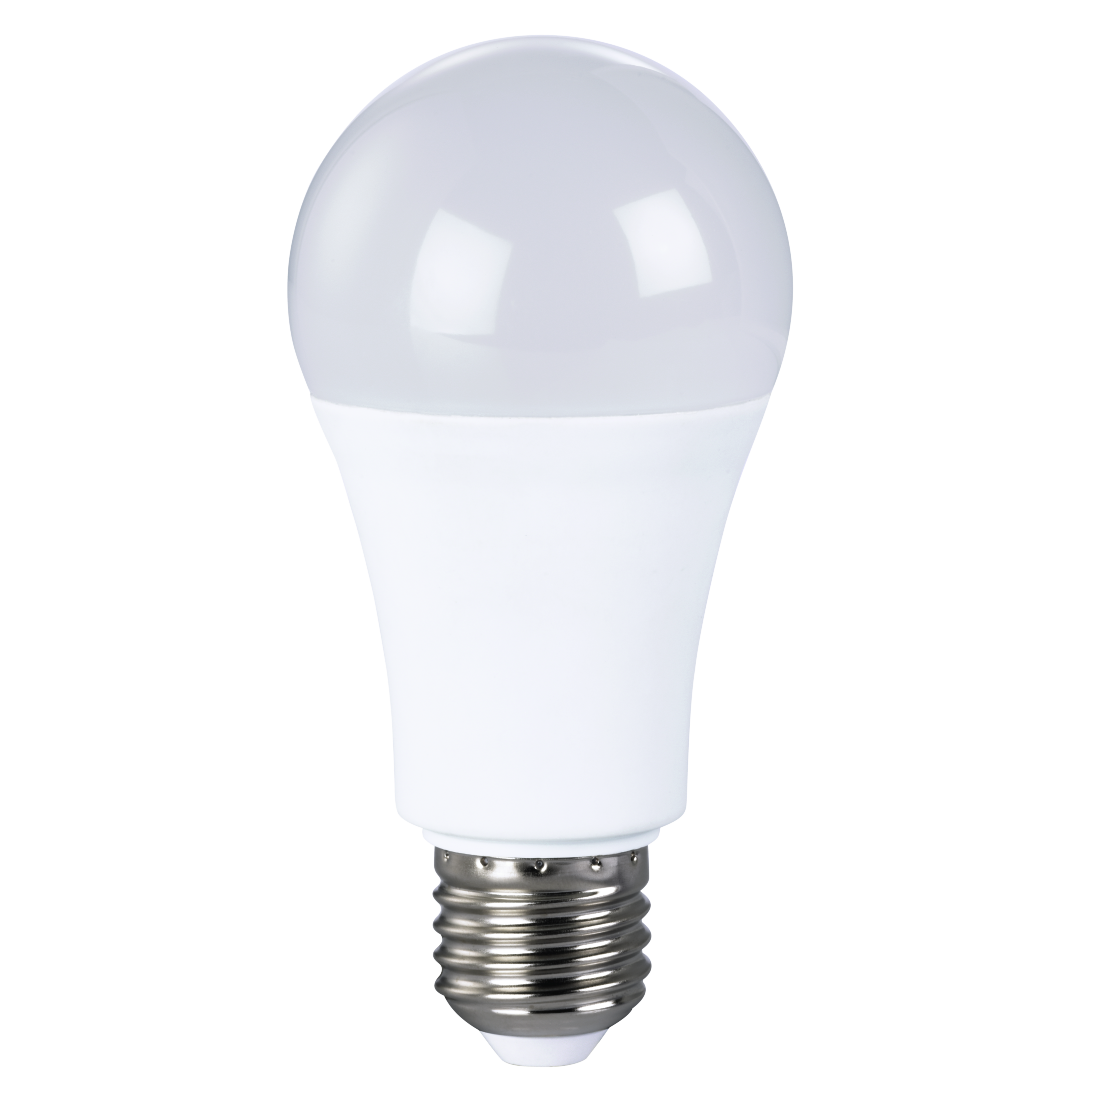 abx High-Res Image - Xavax, LED Bulb, E27, 800lm replaces 60W, incandescent bulb, warm white/daylight